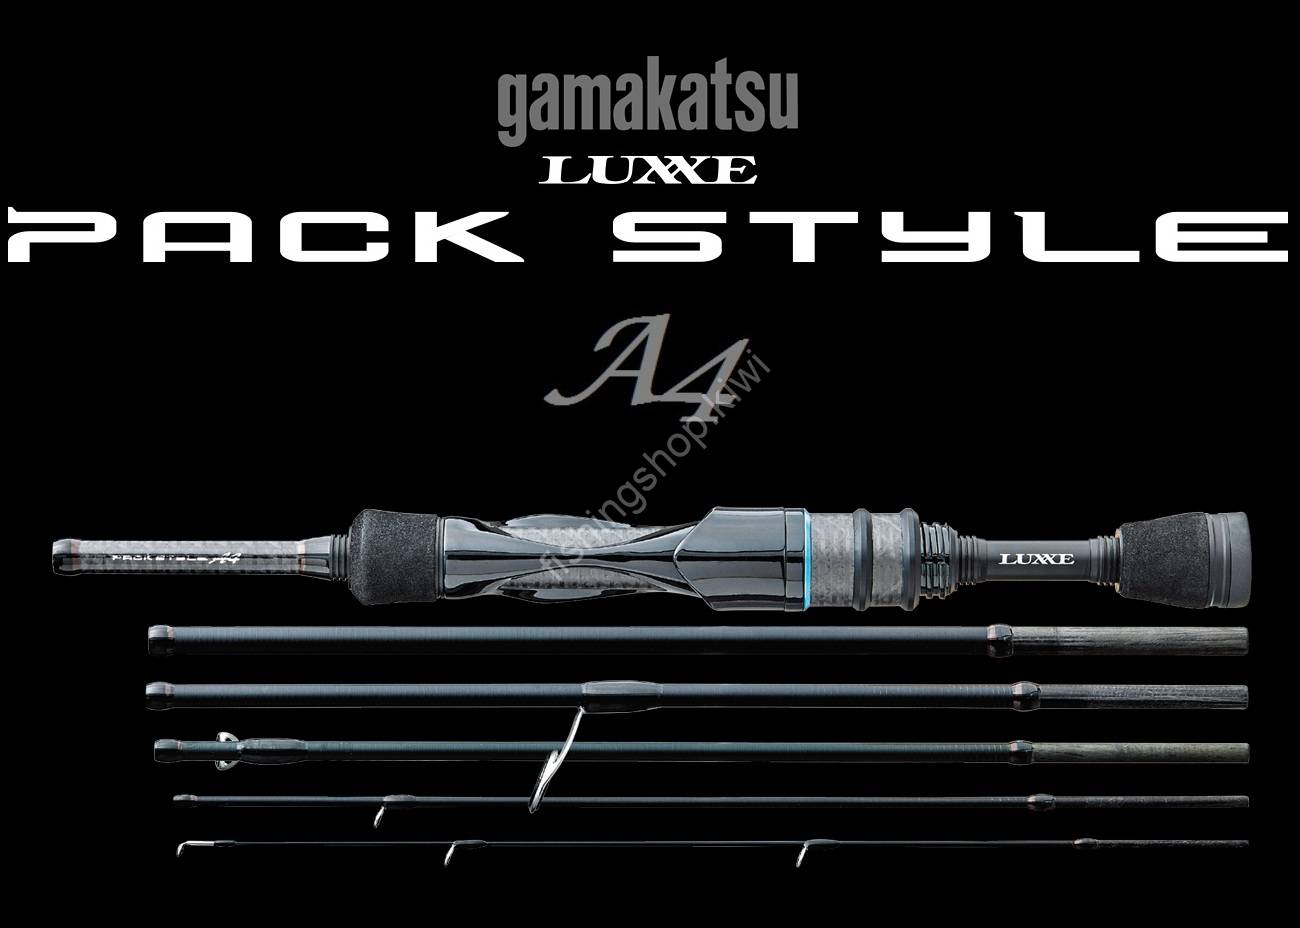 GAMAKATSU Luxxe 24711 Pack Style A4 S66ML Rods buy at